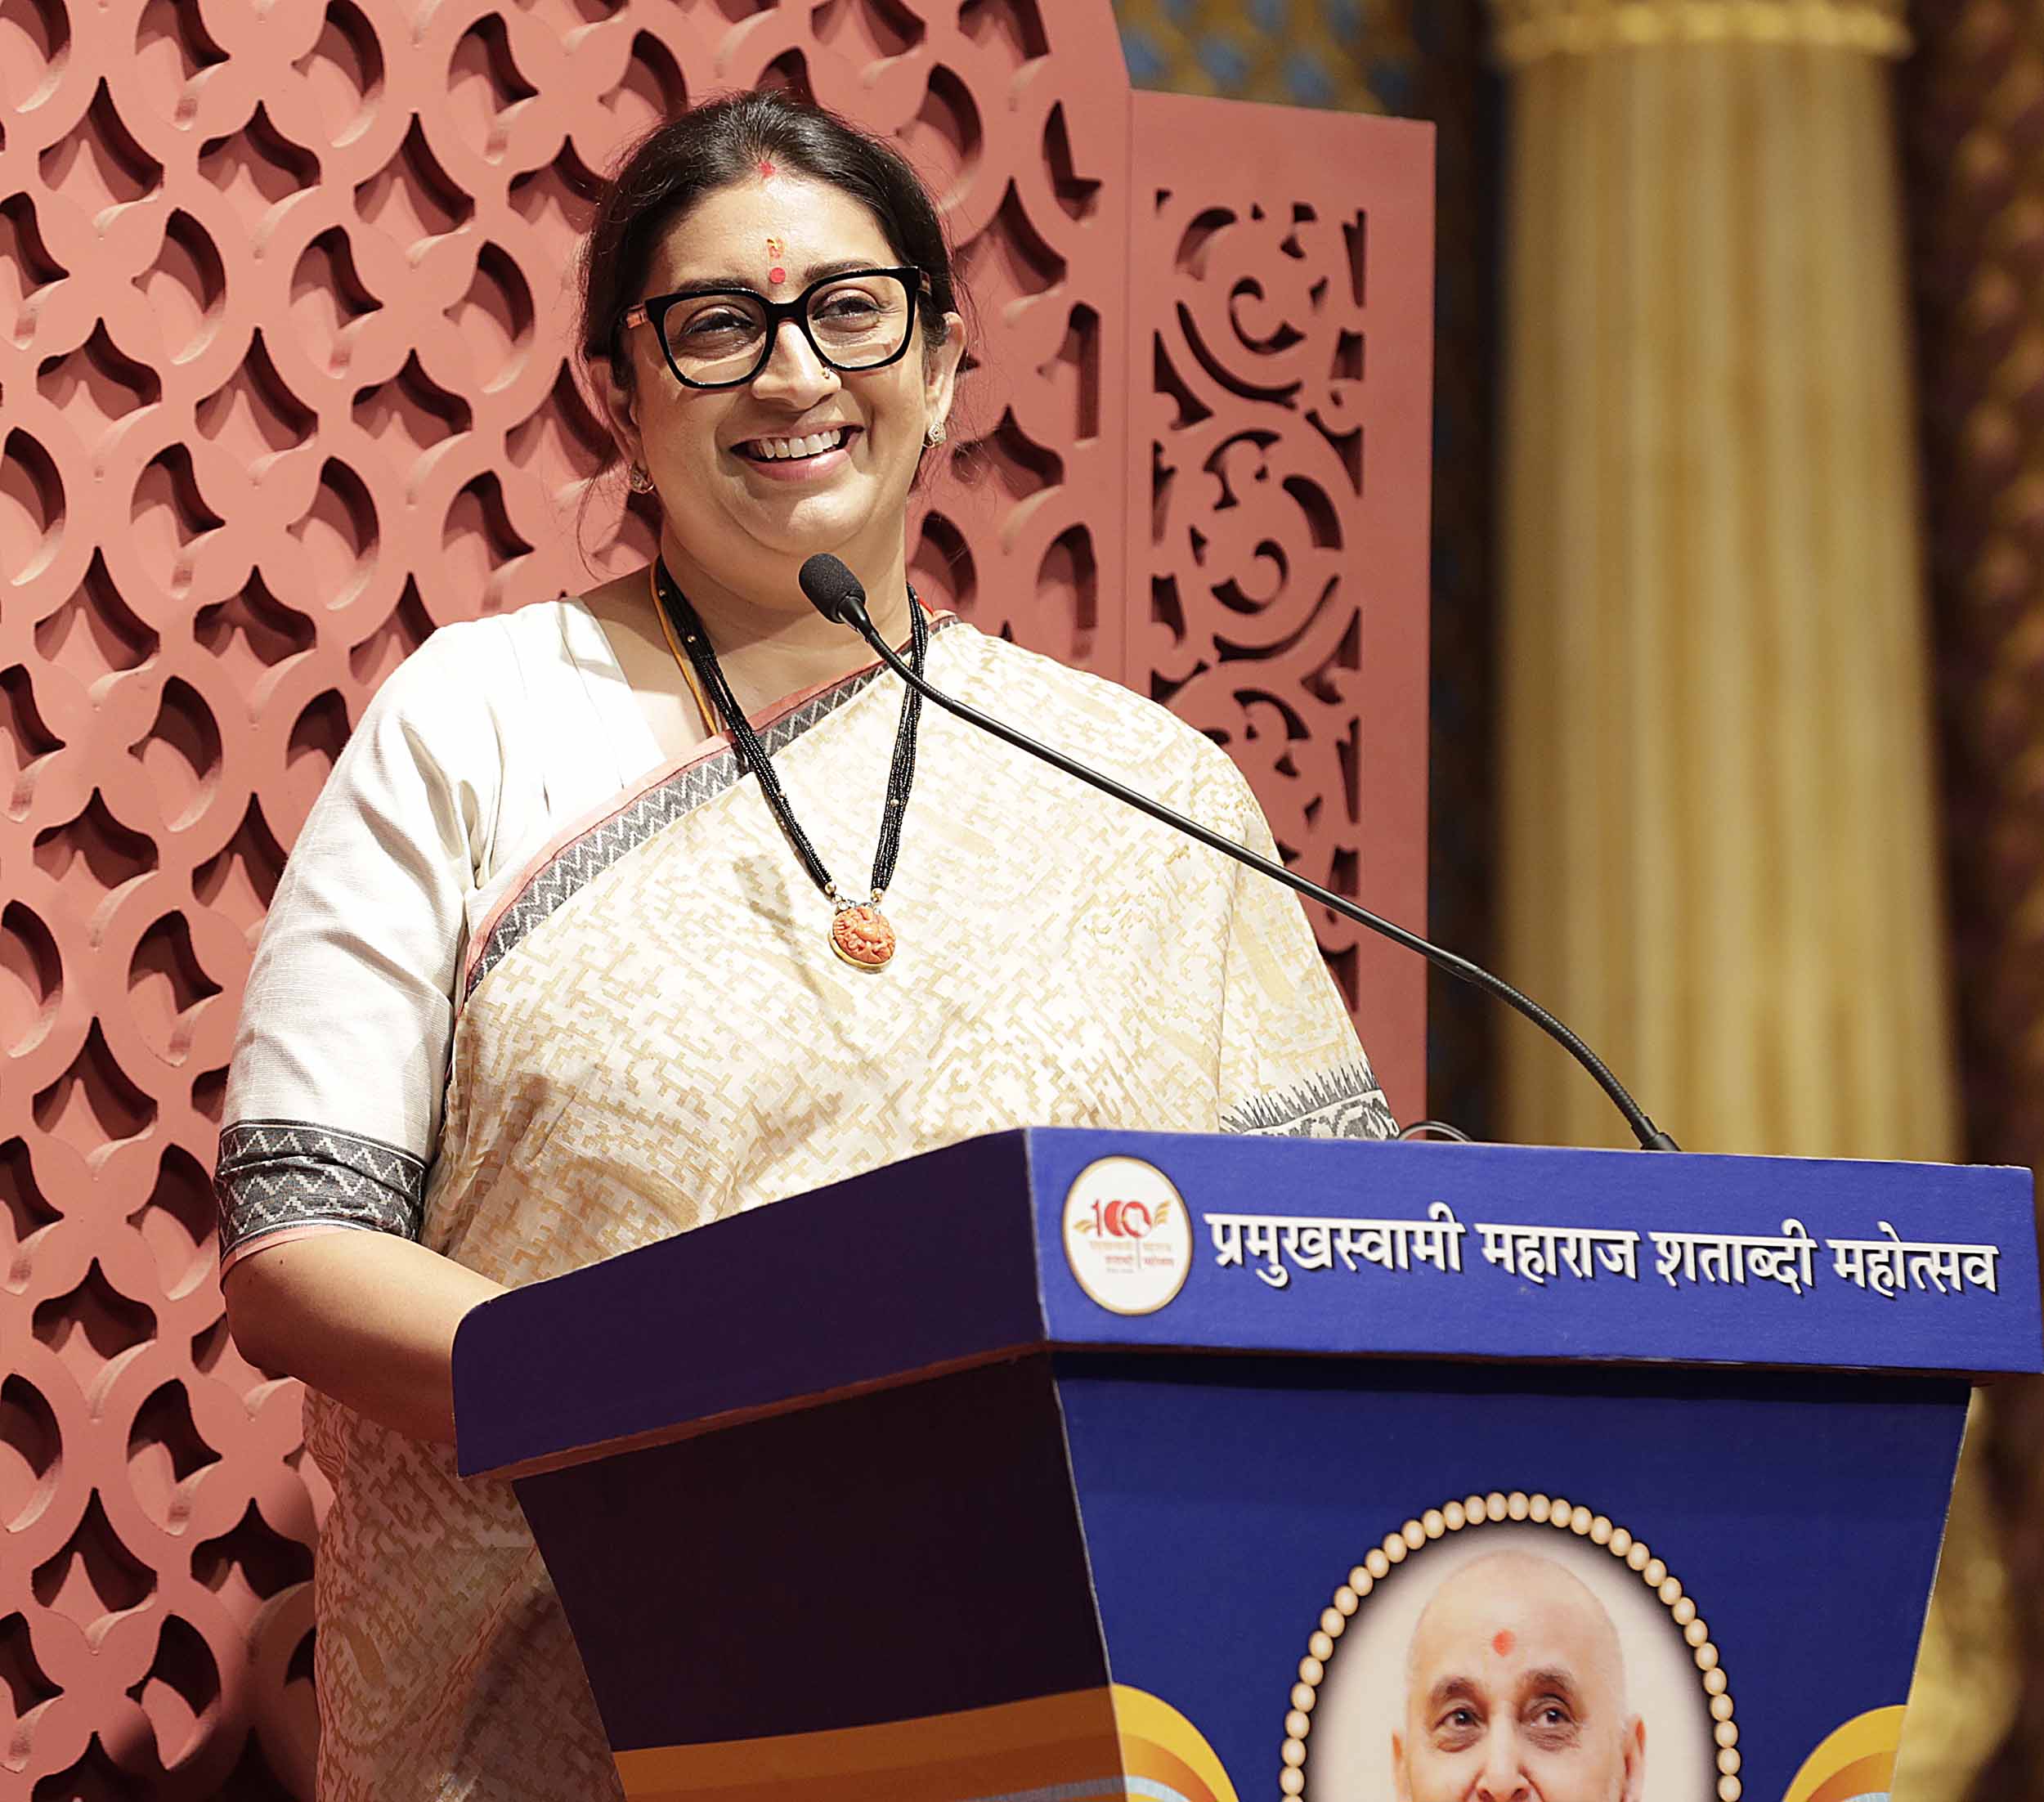 Smt. Smriti Irani, Minister for Women and Child Development, Minority Affairs - Government of India addressing in Evening Assembly